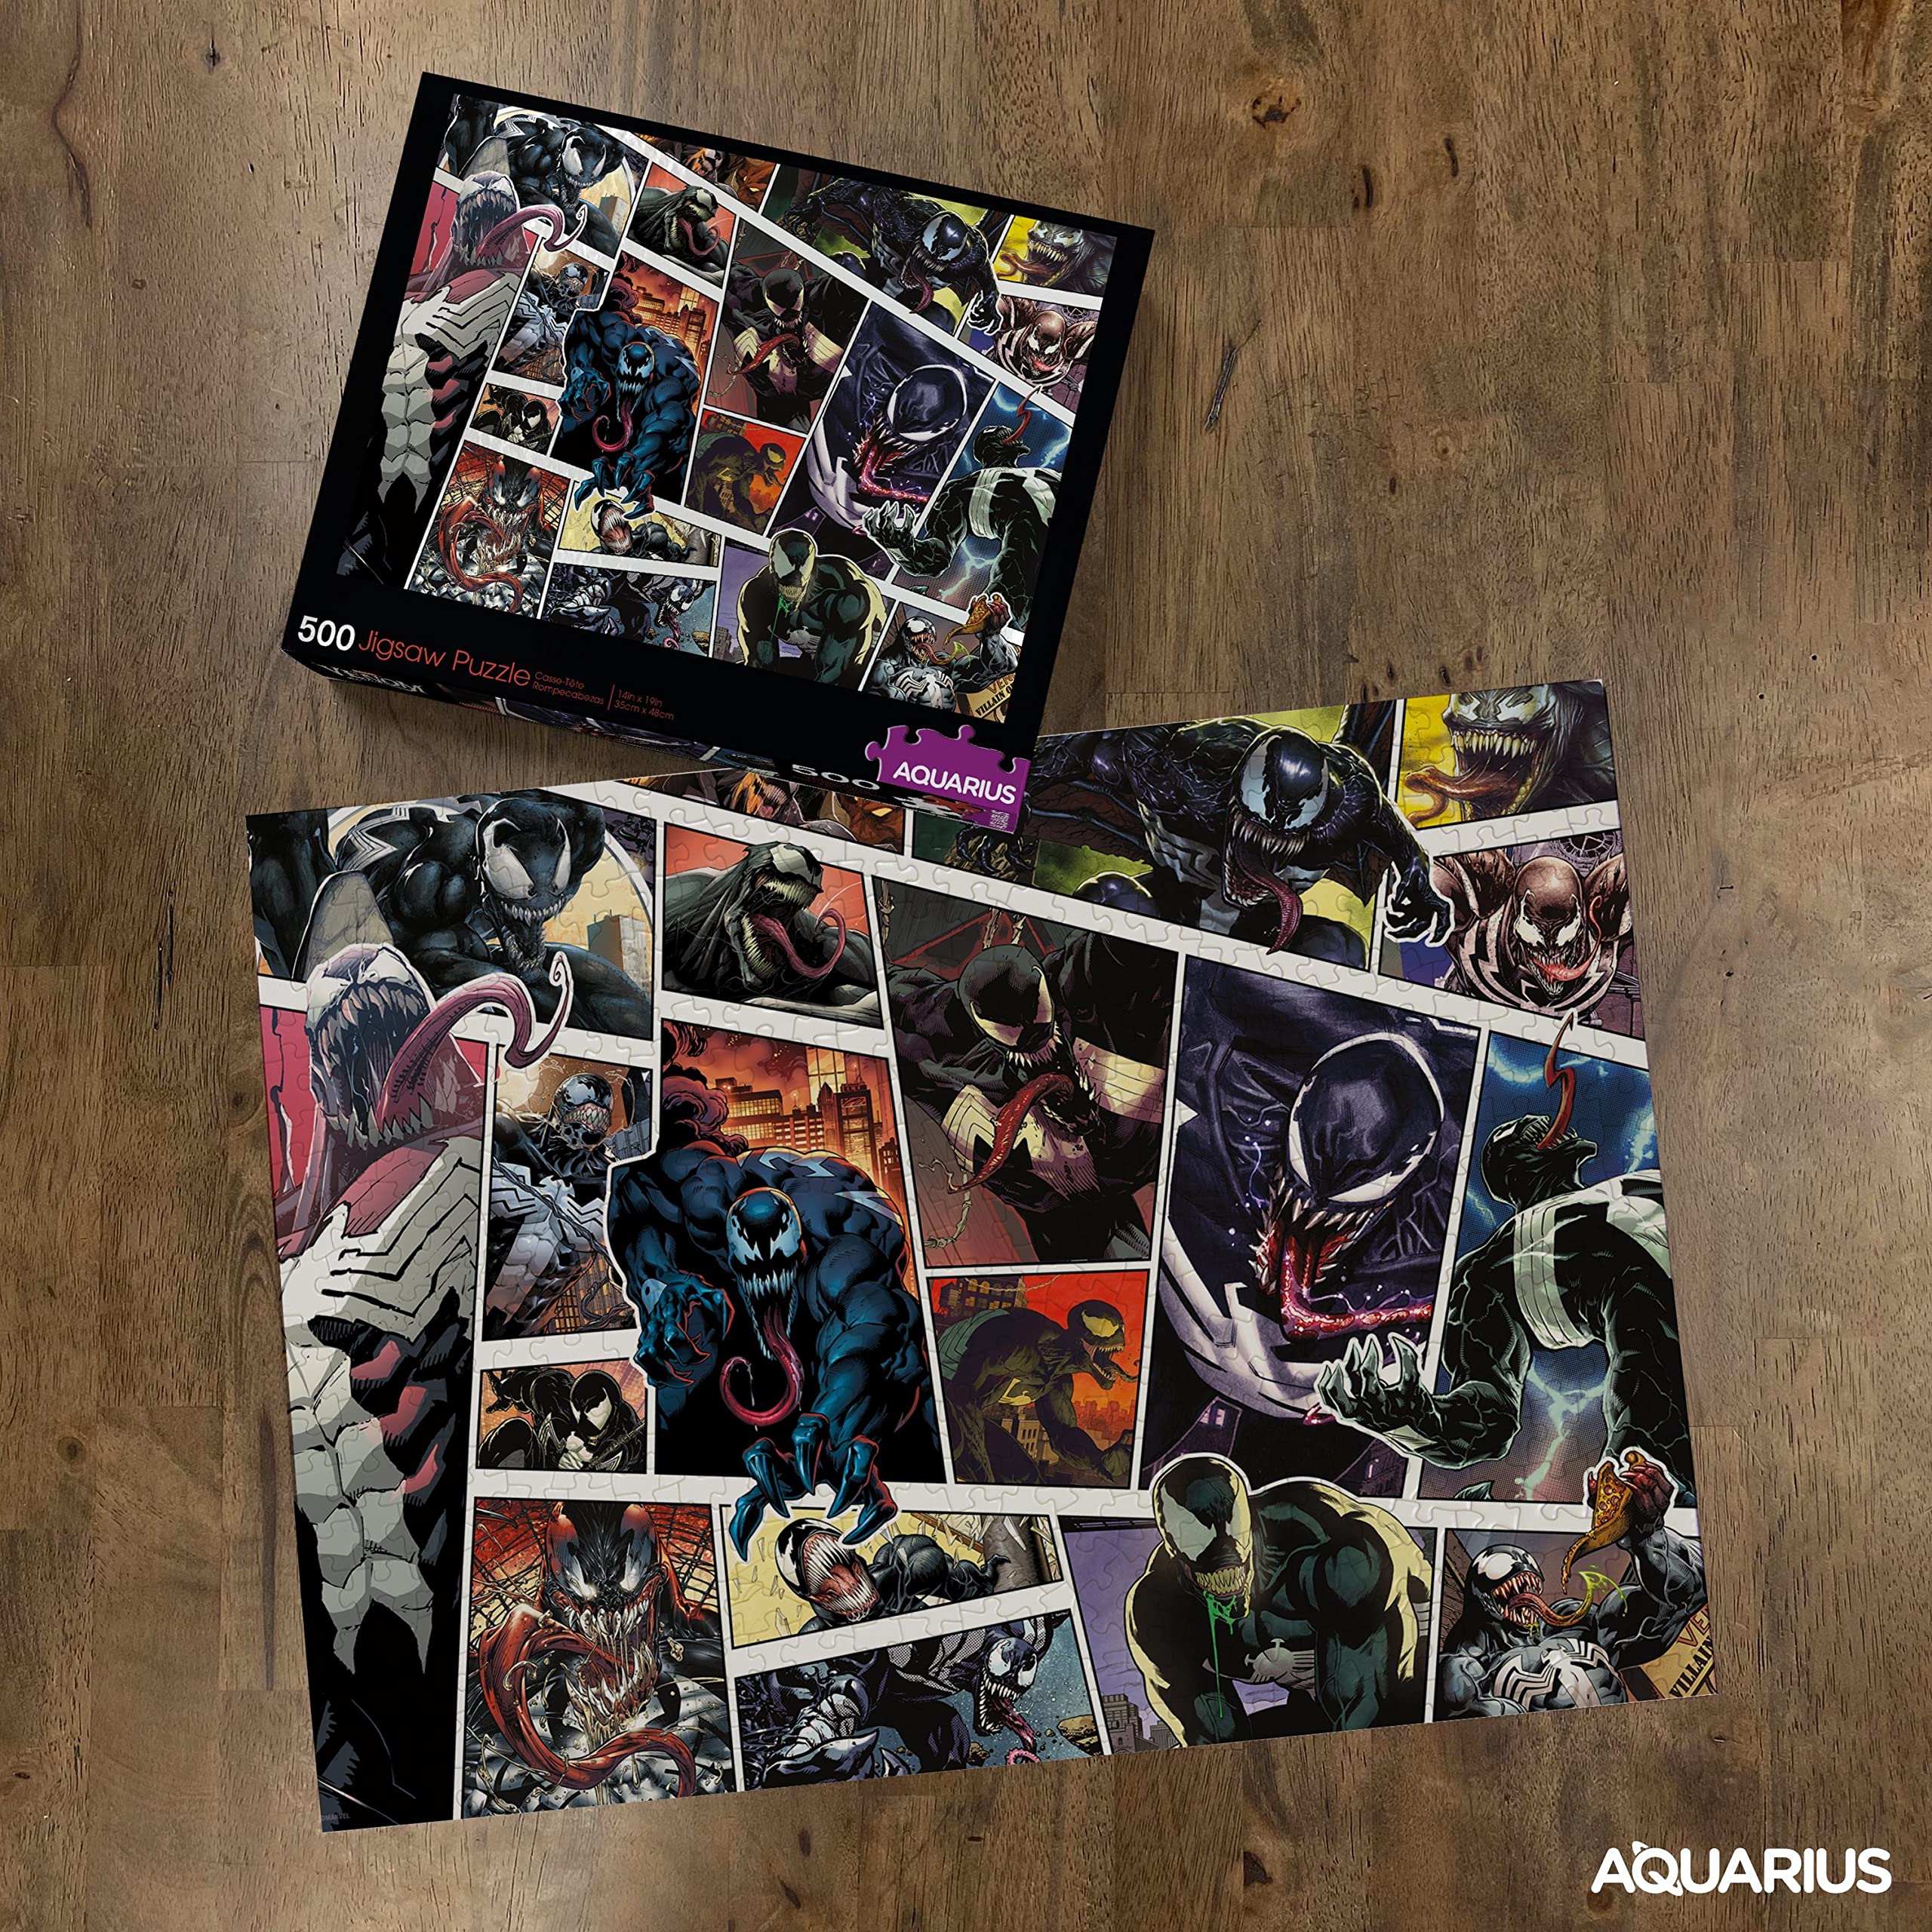 AQUARIUS Marvel Venom Puzzle (500 Piece Jigsaw Puzzle) - Glare Free - Precision Fit - Officially Licensed Marvel Merchandise & Collectibles - 14x19 Inches